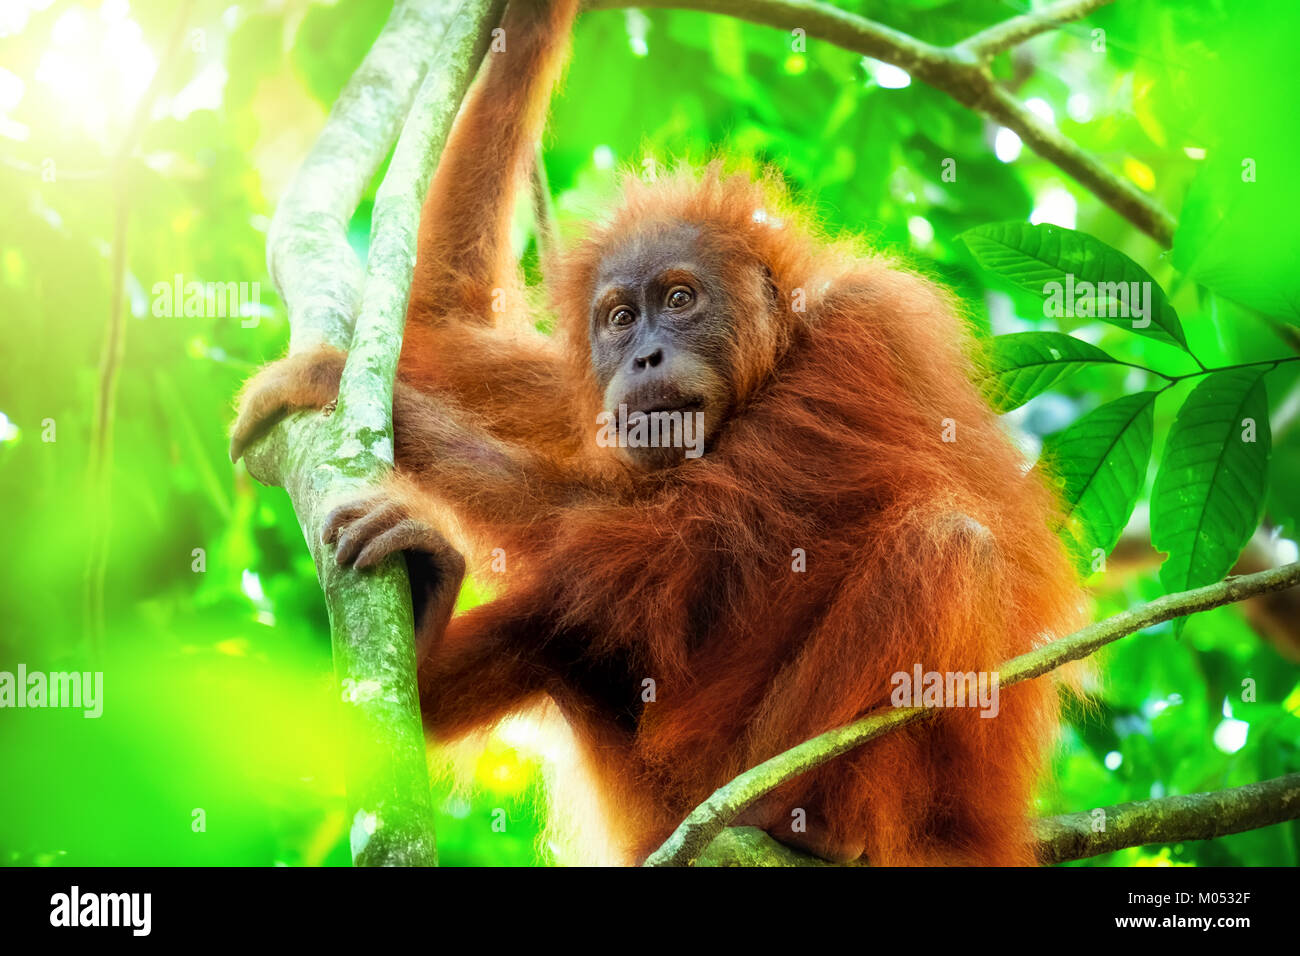 World's cutest baby orangutan hangs in a tree in Borneo - a Royalty Free  Stock Photo from Photocase